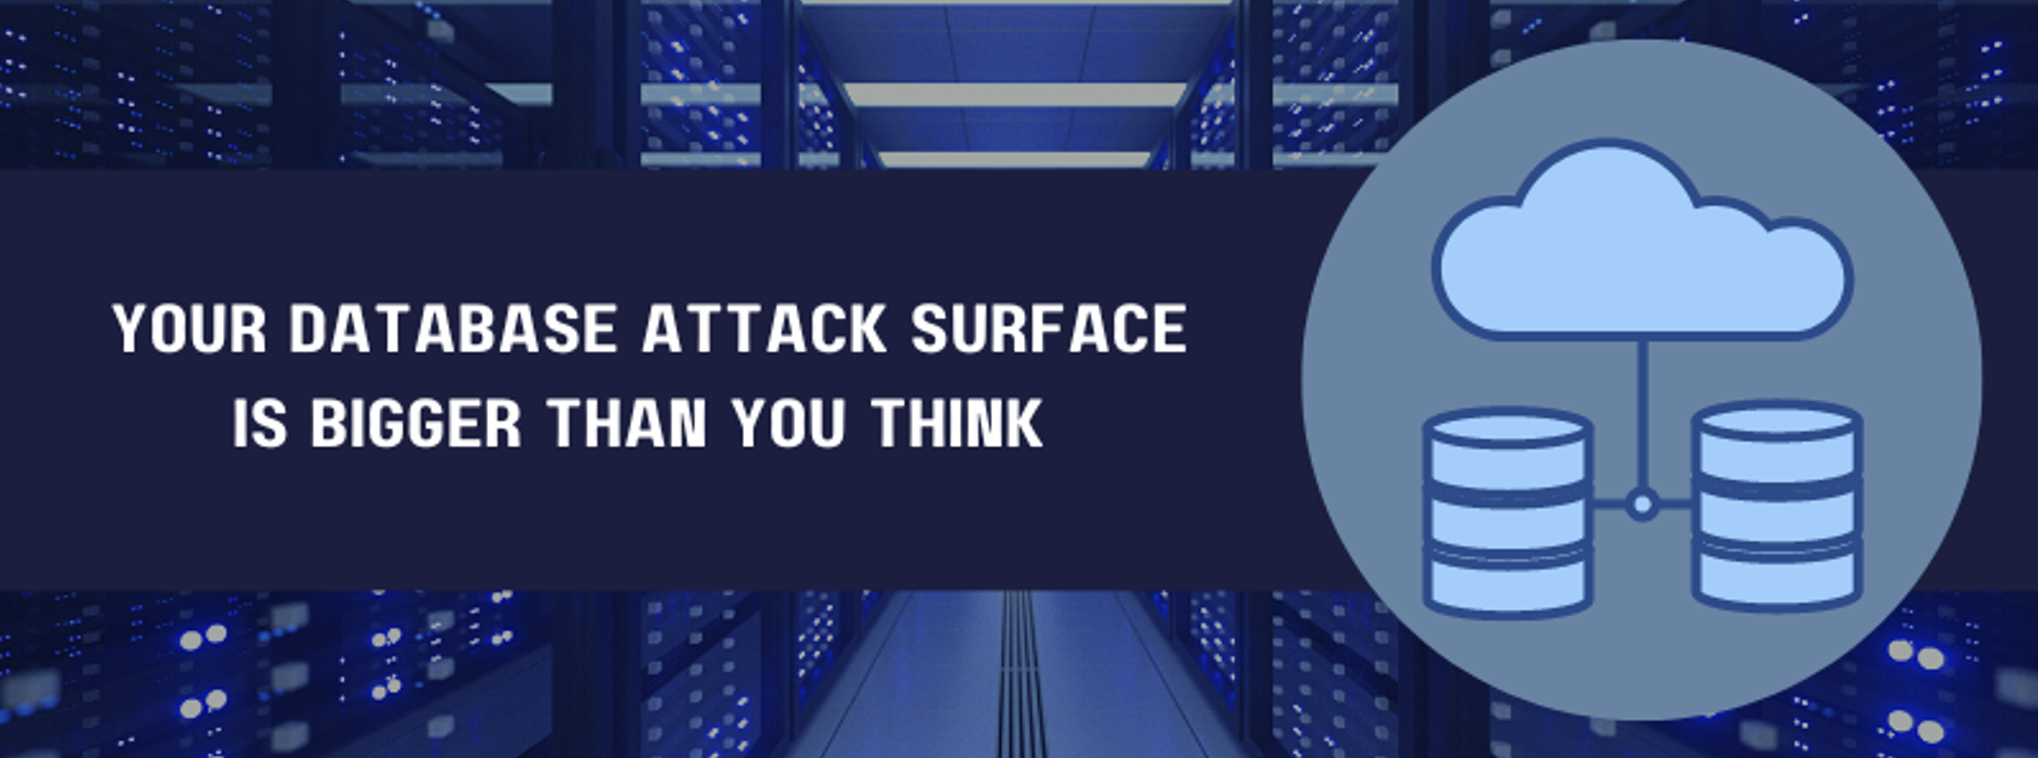 Your Database Attack Surface is Bigger than You Think